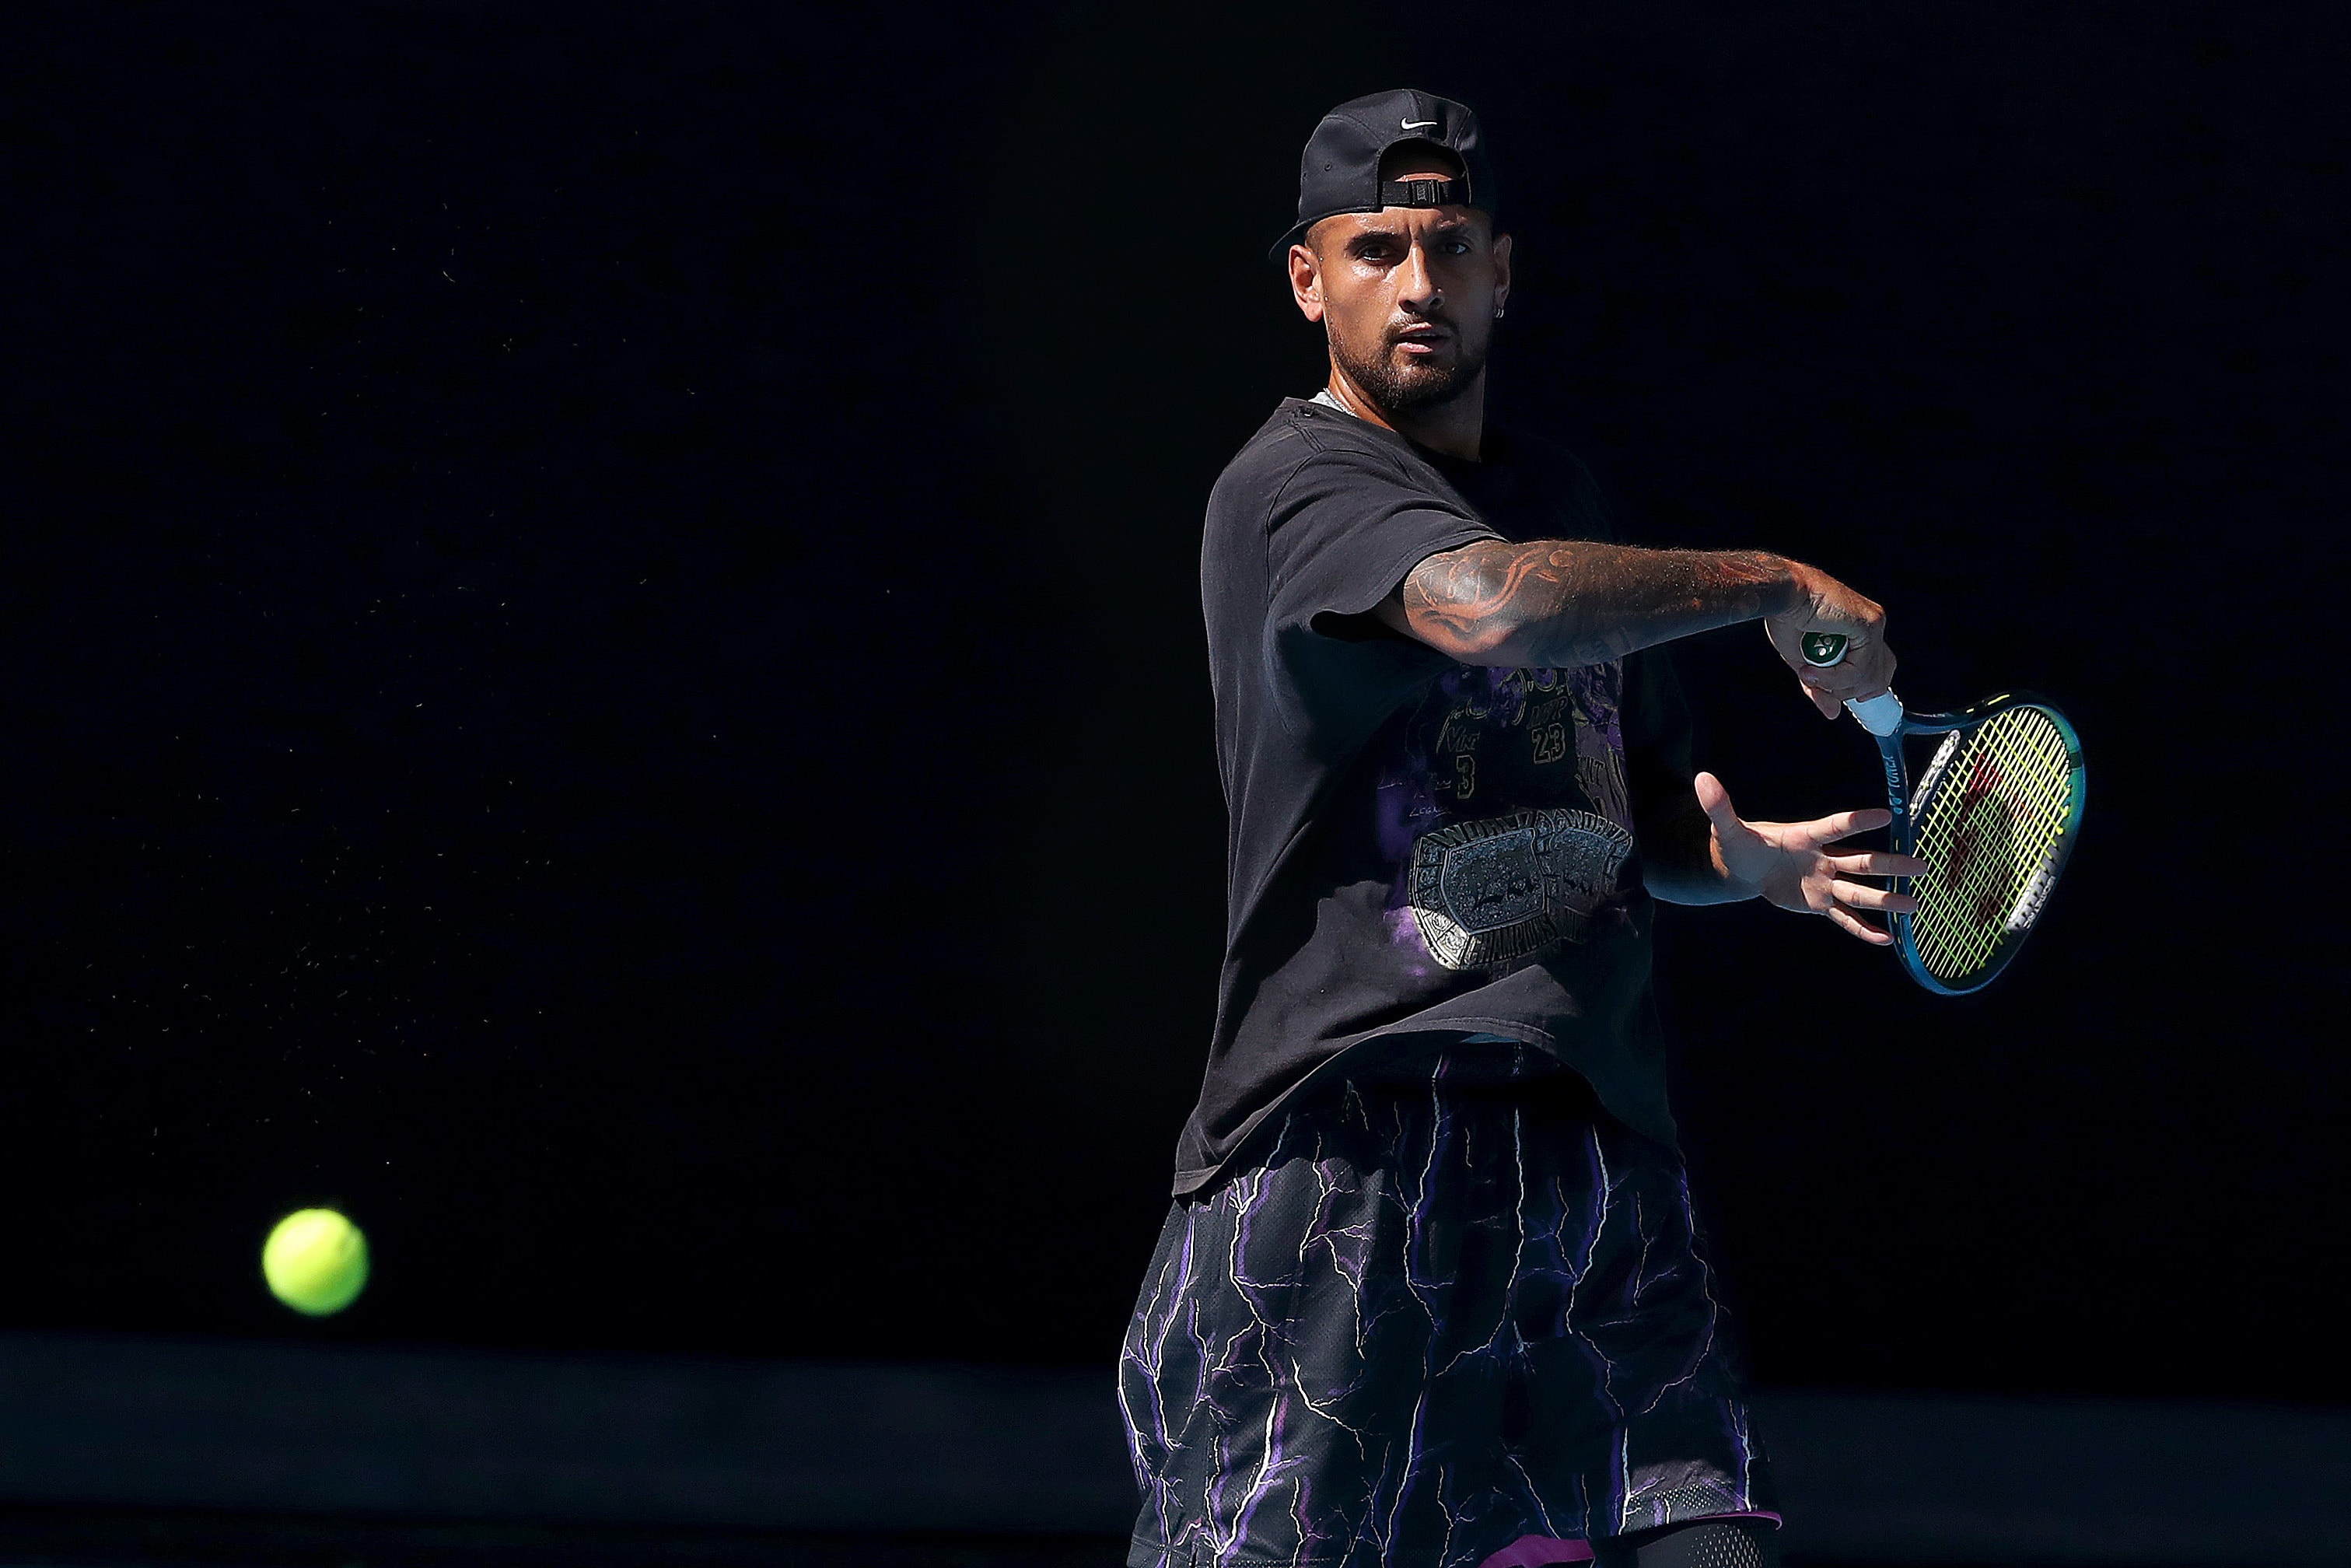 UTS Announce a Thrilling Tennis Event in Los Angeles with Nick Kyrgios, Taylor Fritz and Diego Schwartzman Opening the Eight-Man Field